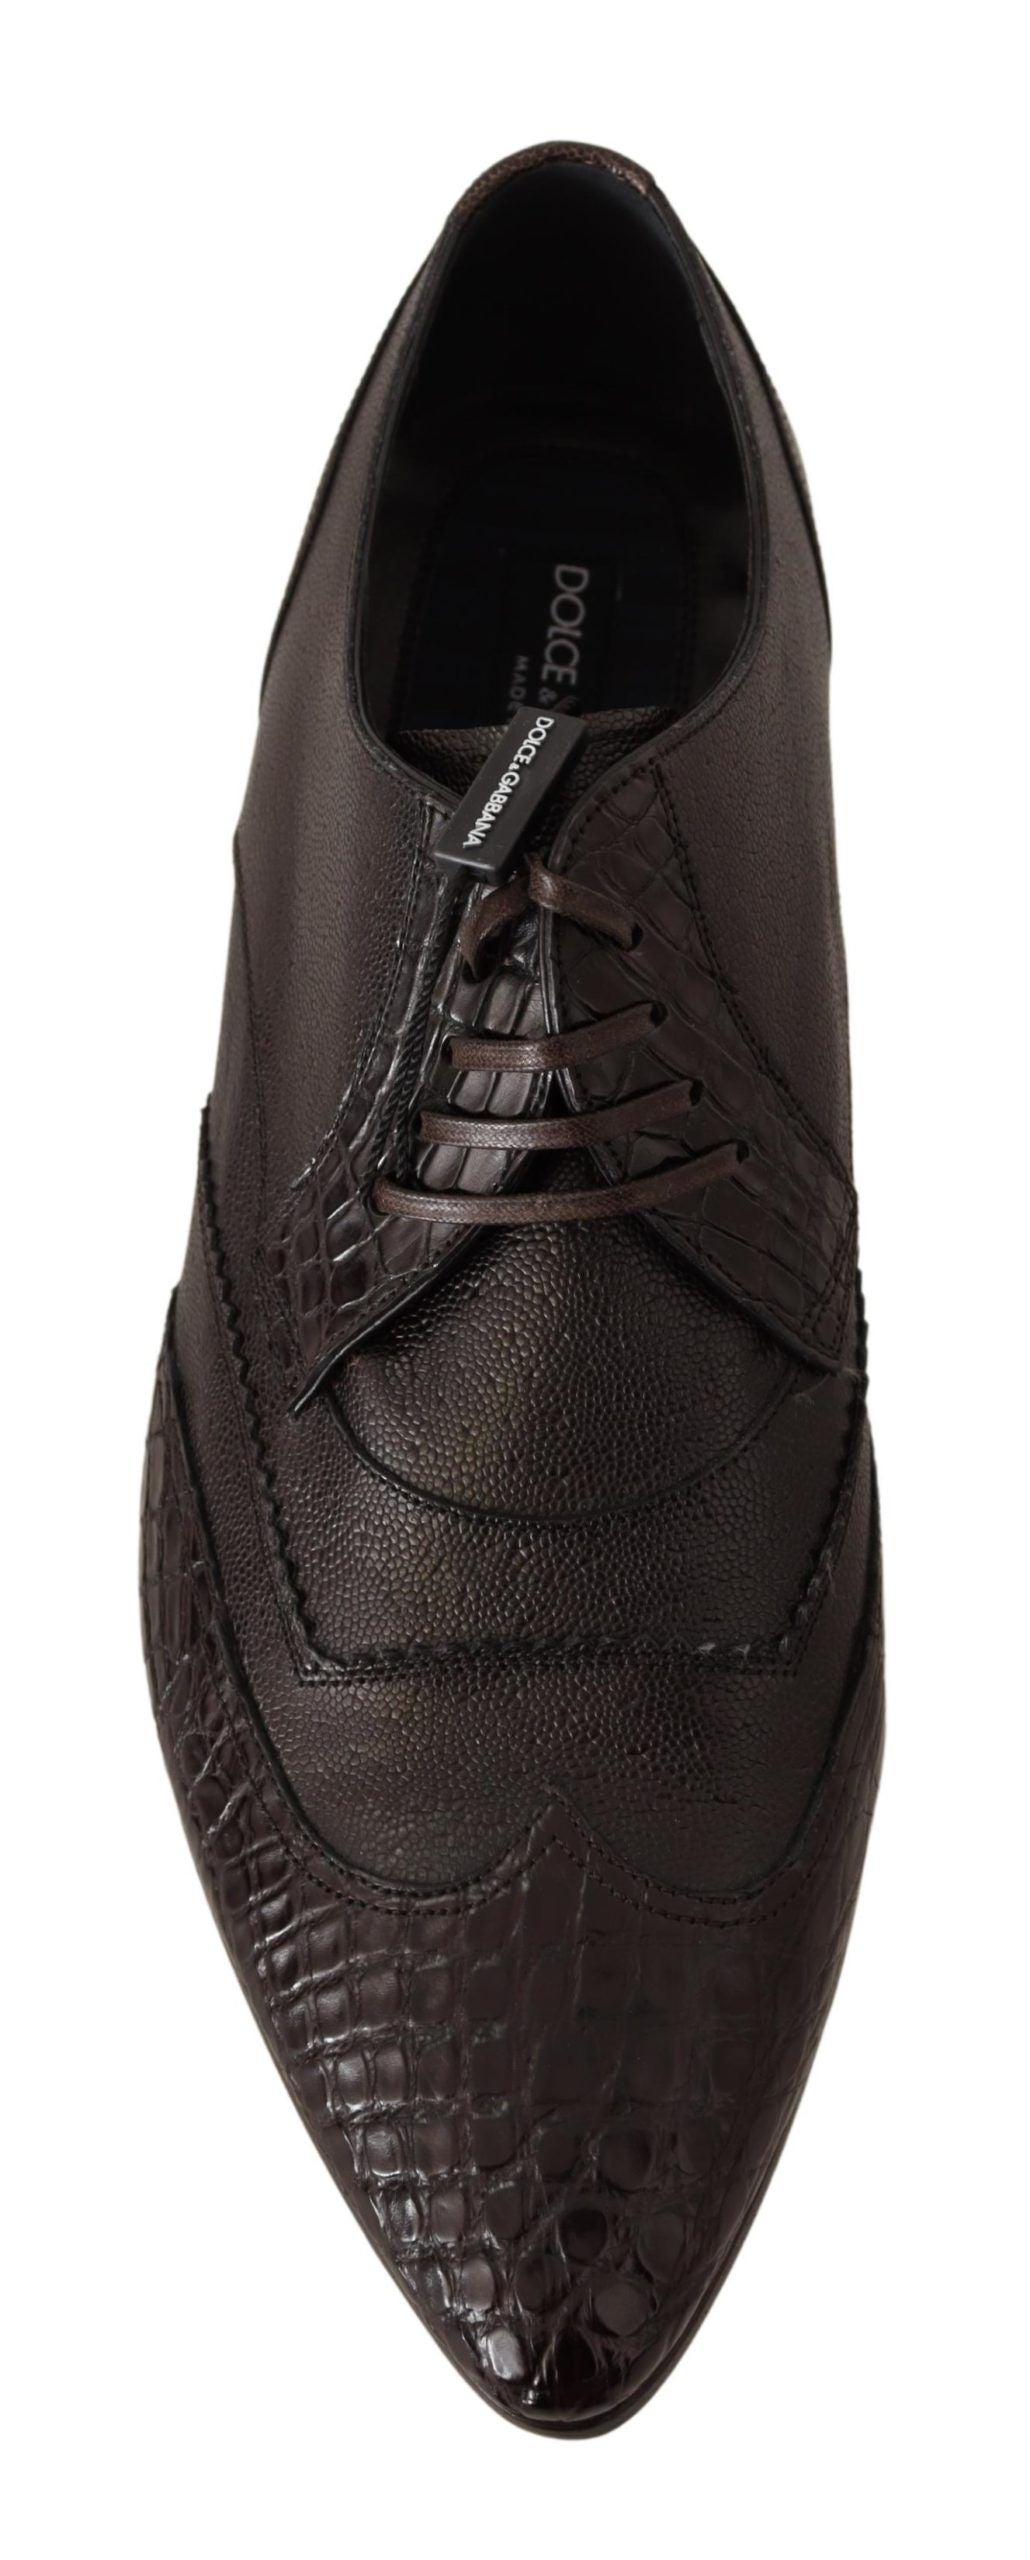 Brown Exotic Leather Derby Dress Shoes